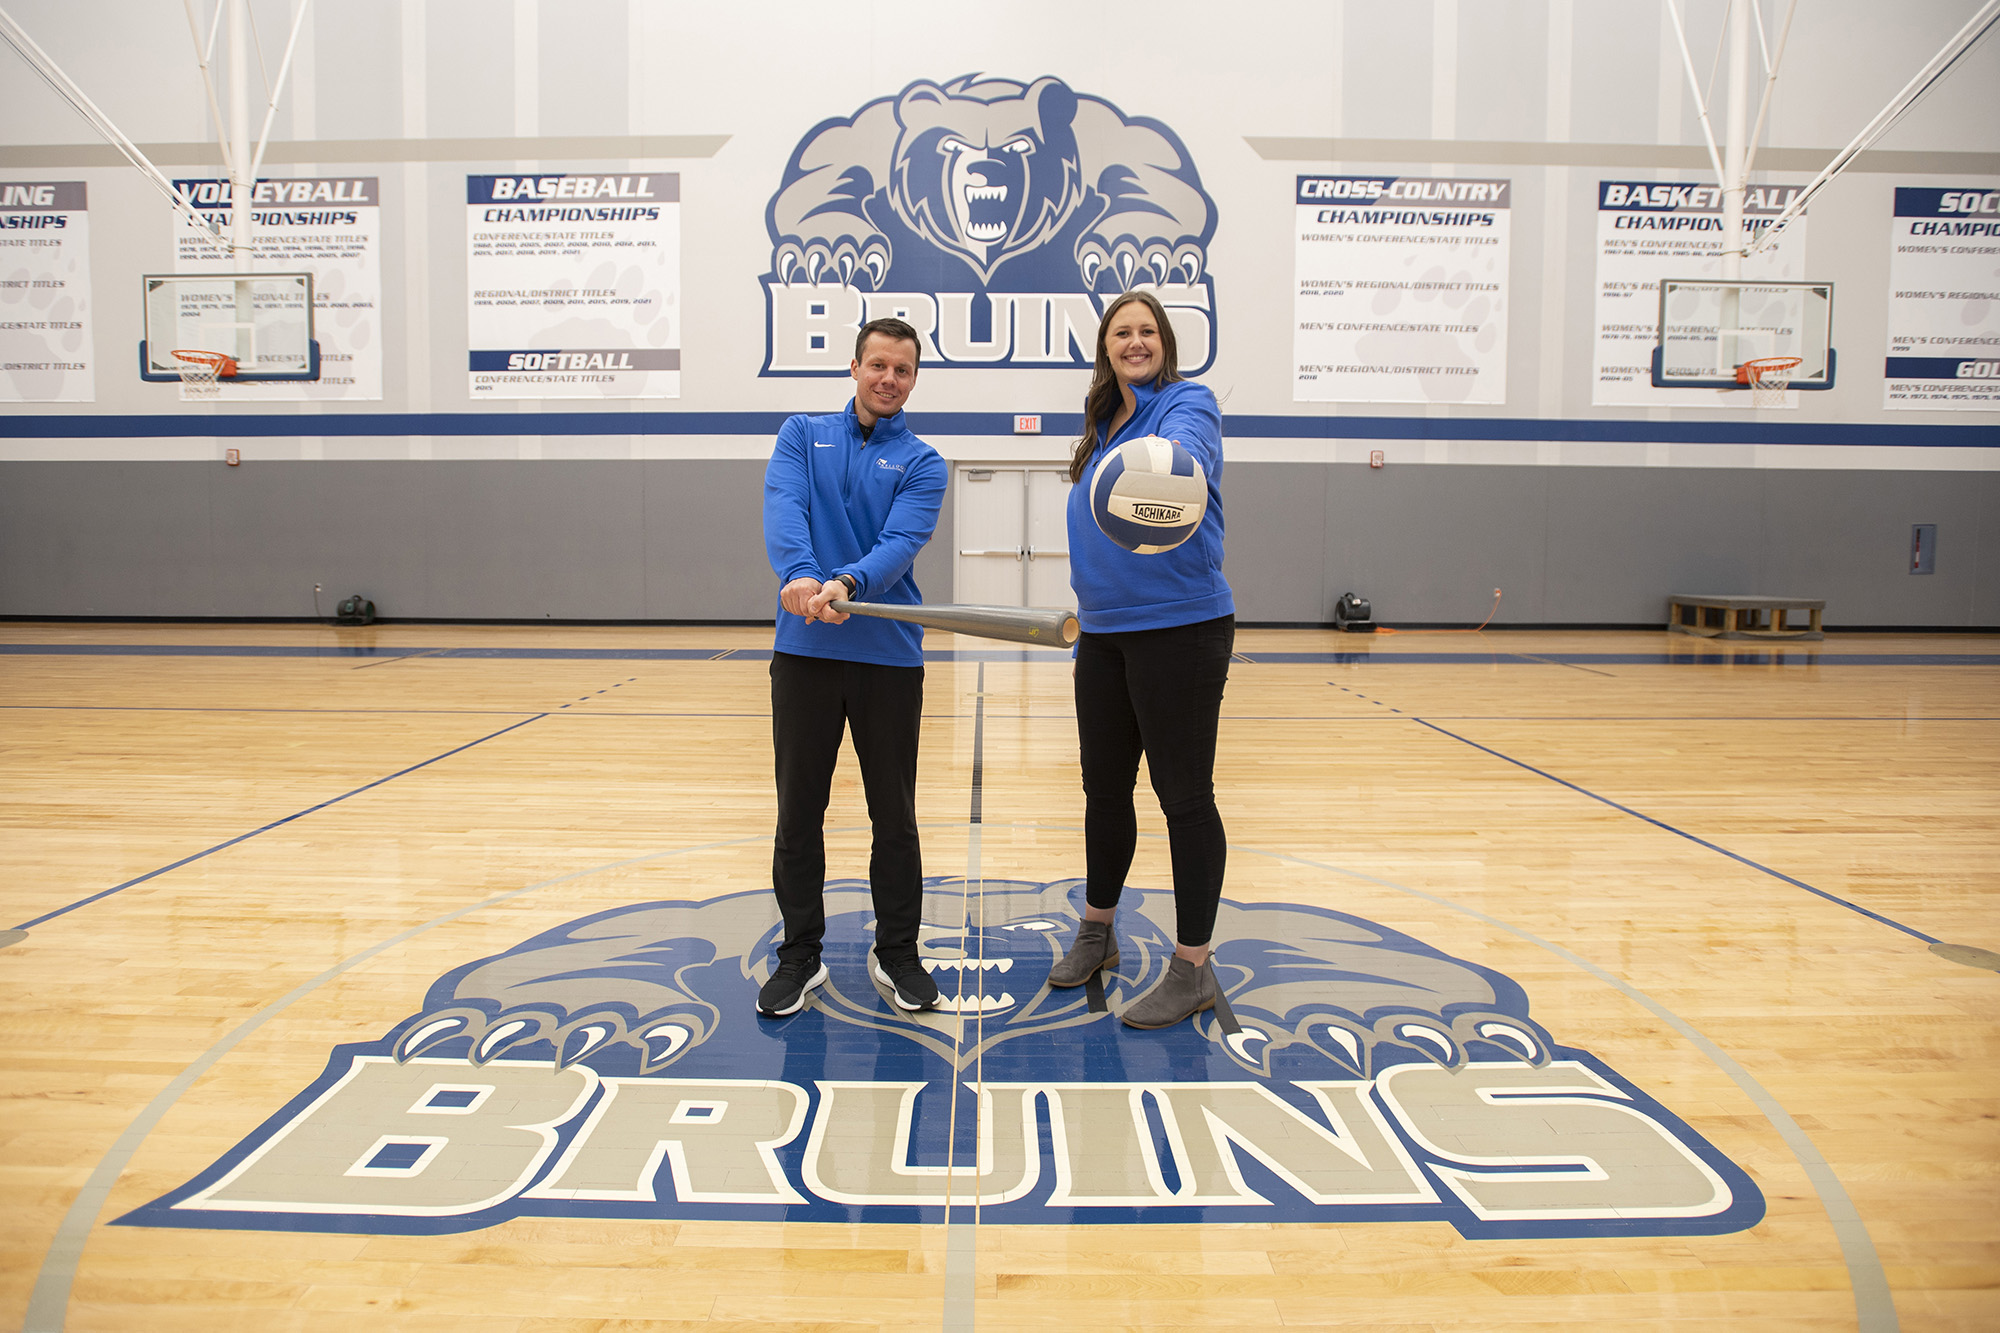 KCC Athletic Director Drew Fleming holds a bat and Assistant Athletic Director Mikayla Shell holds a volleyball in the Miller Gym.